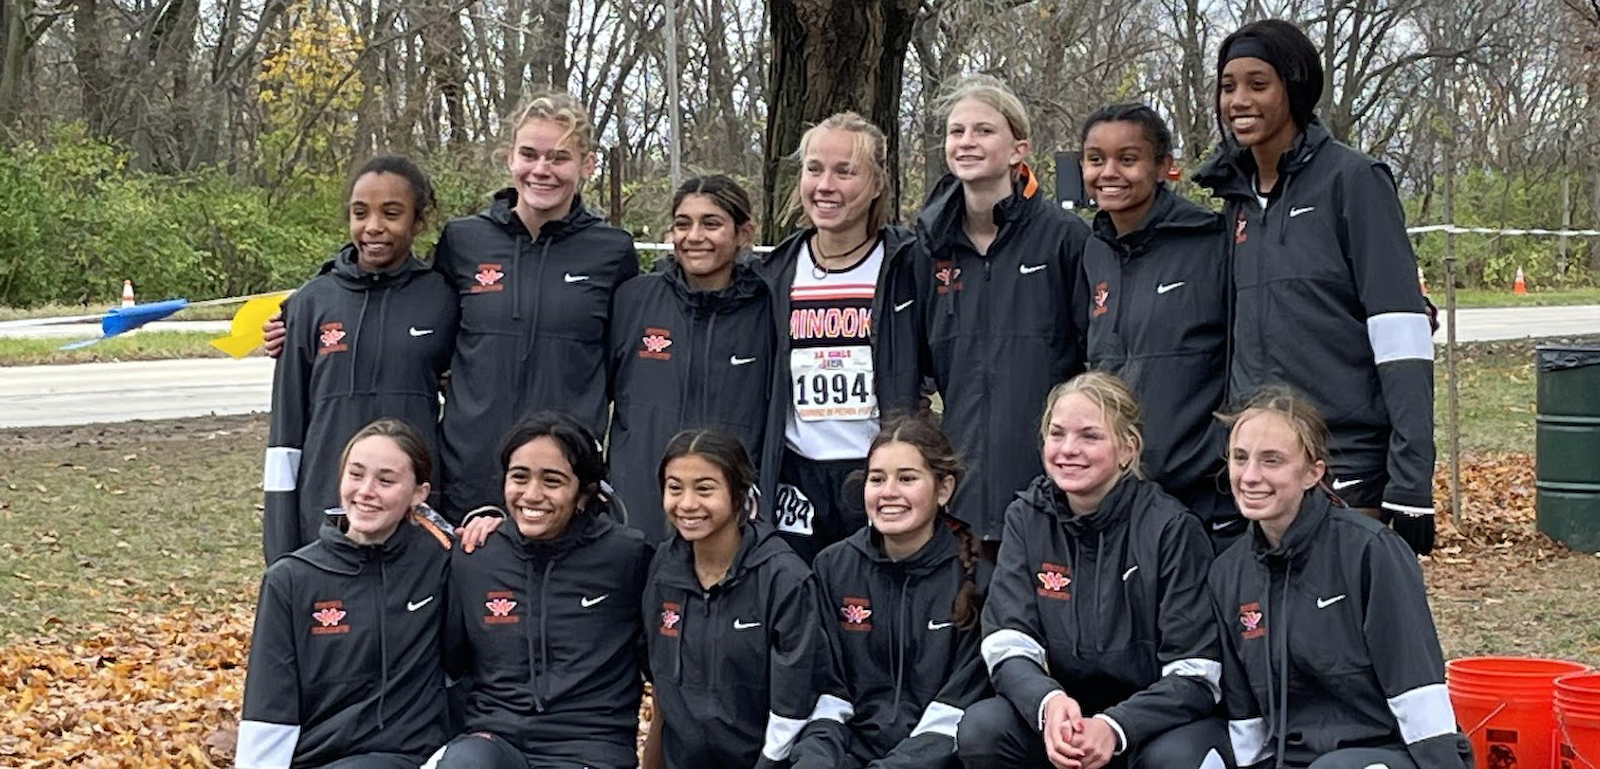 Girls Cross Country take 4th Place at IHSA 3A STATE cover photo